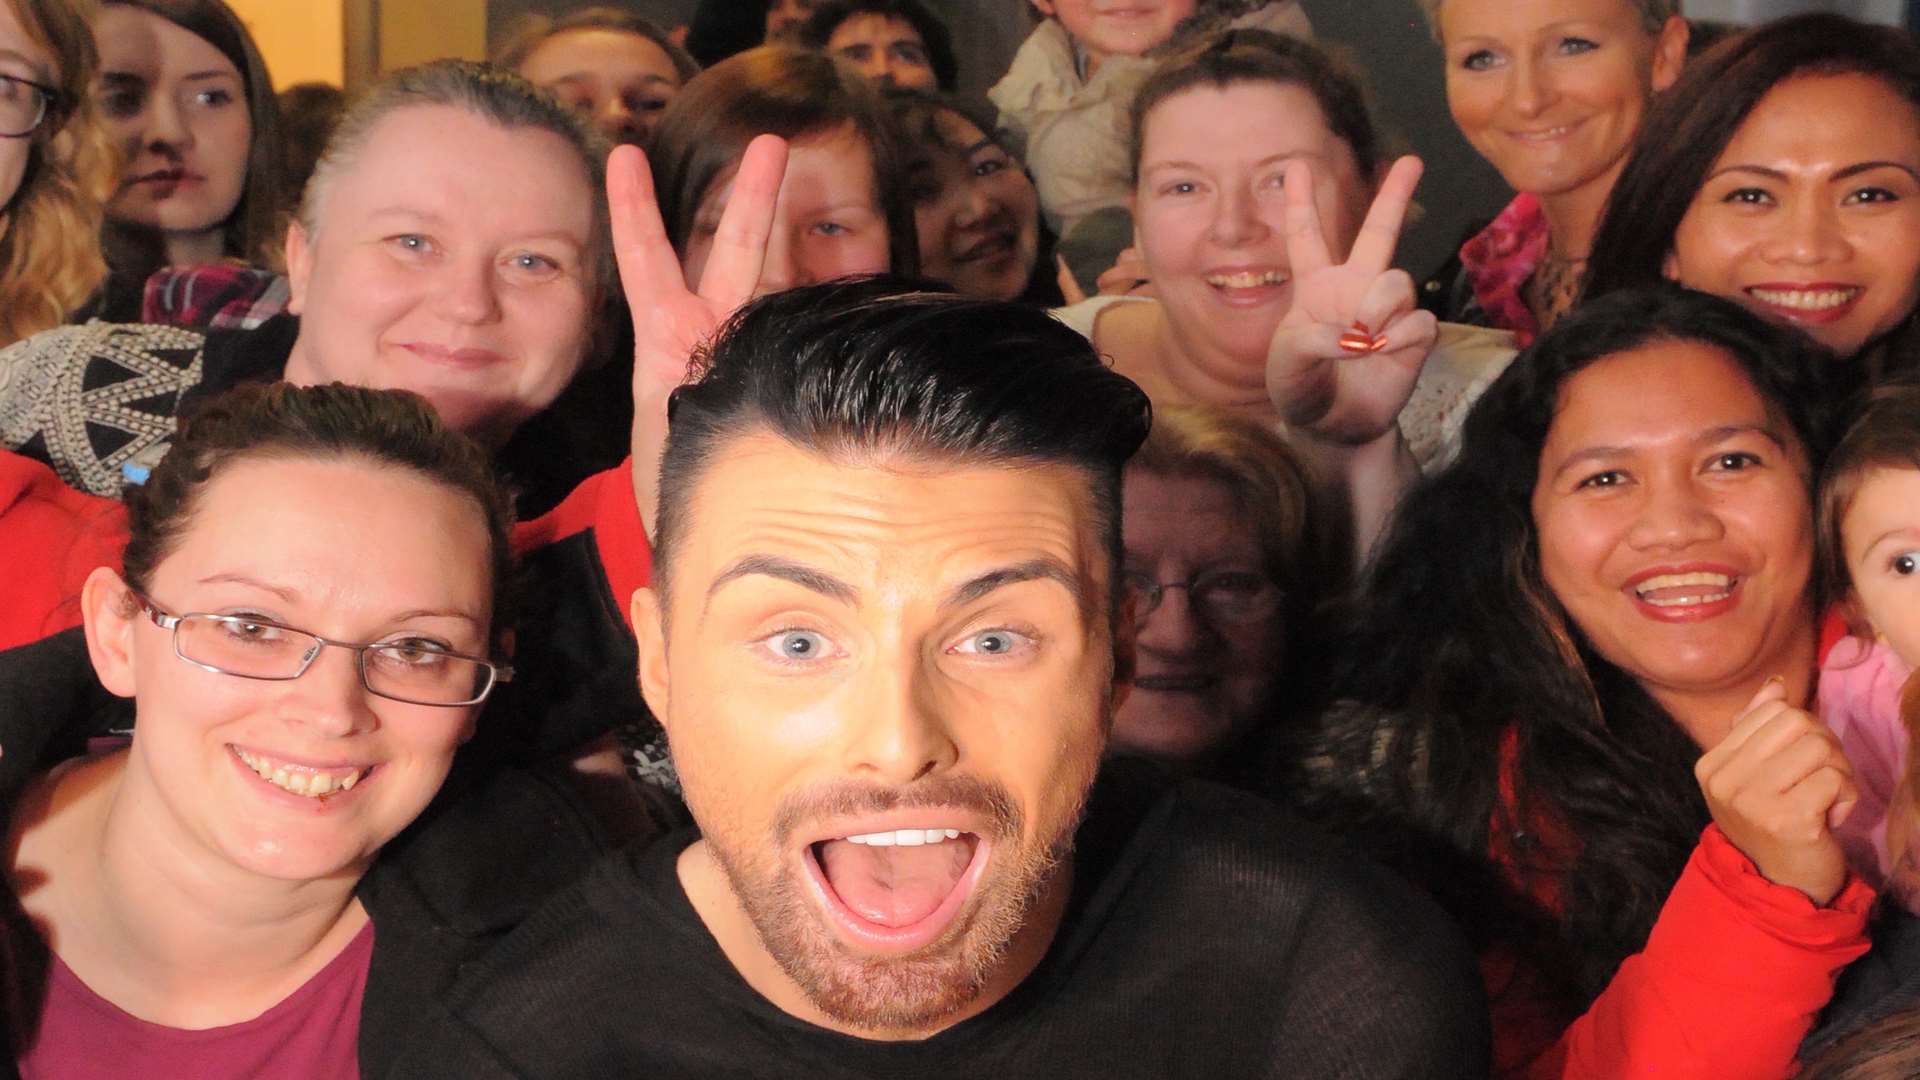 Rylan with fans at the Dockside Outlet Centre at Chatham Maritime